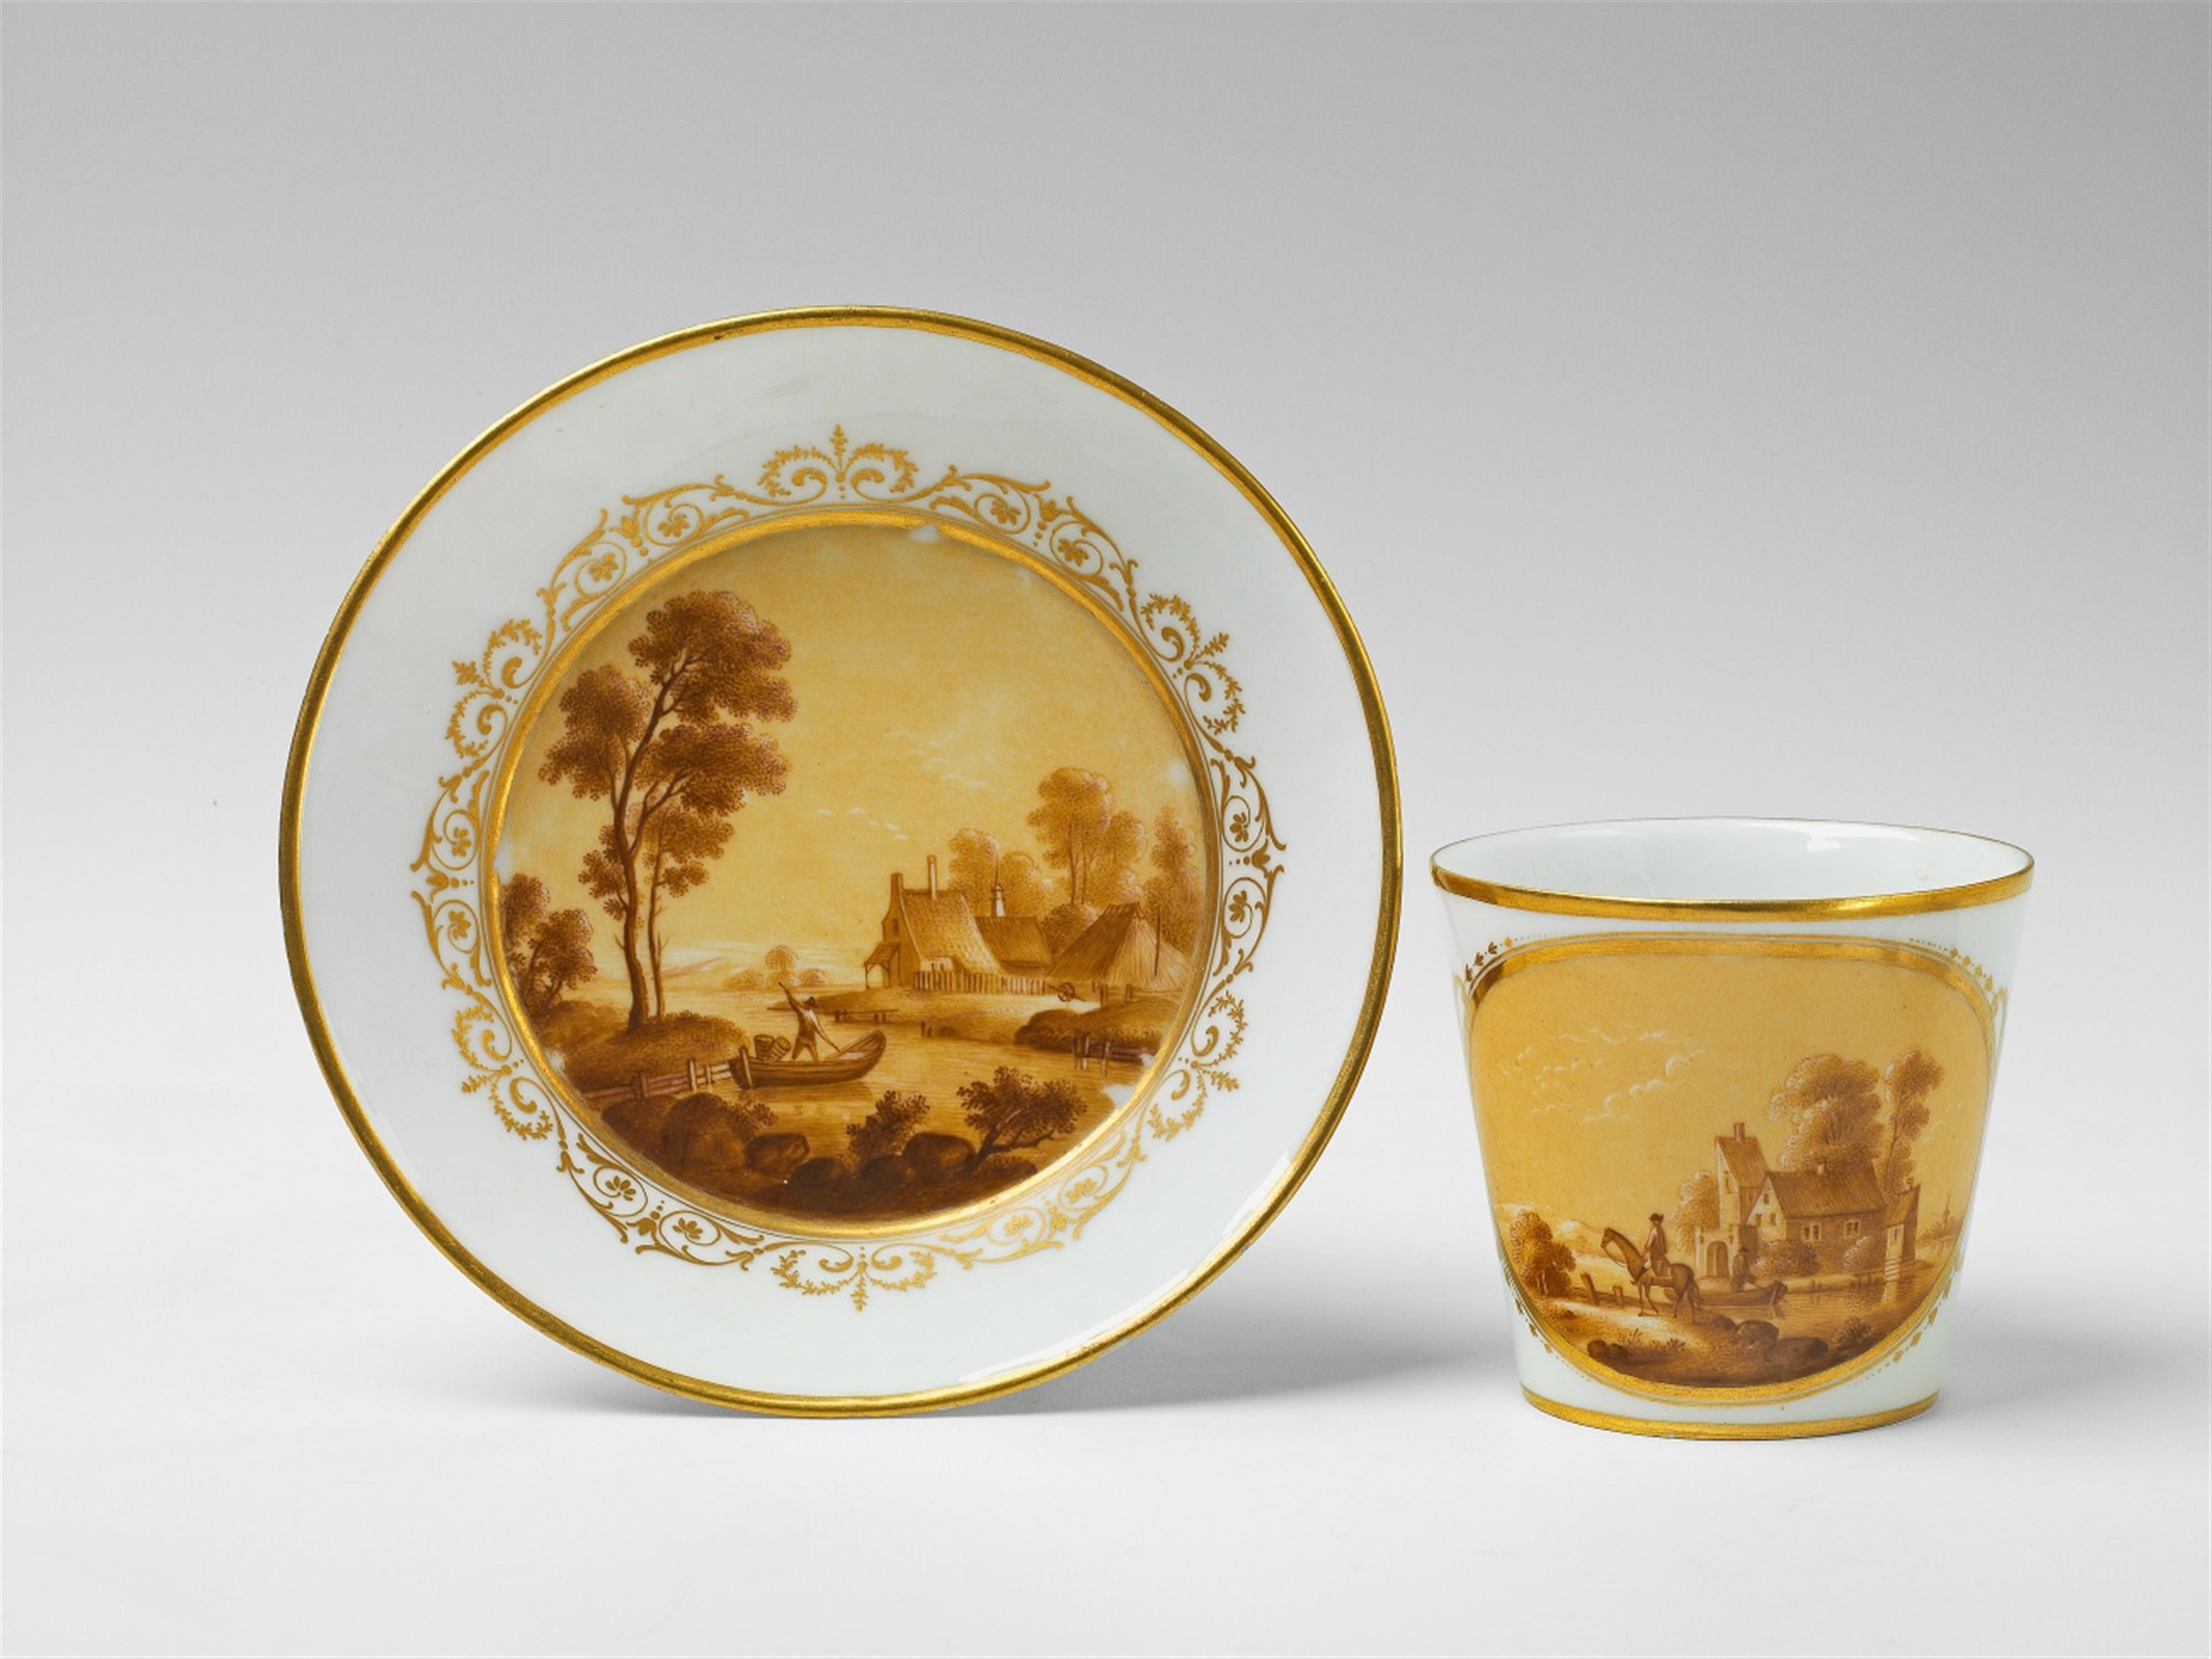 A Berlin KPM porcelain cup and saucer with river landscapes in sepia - image-1